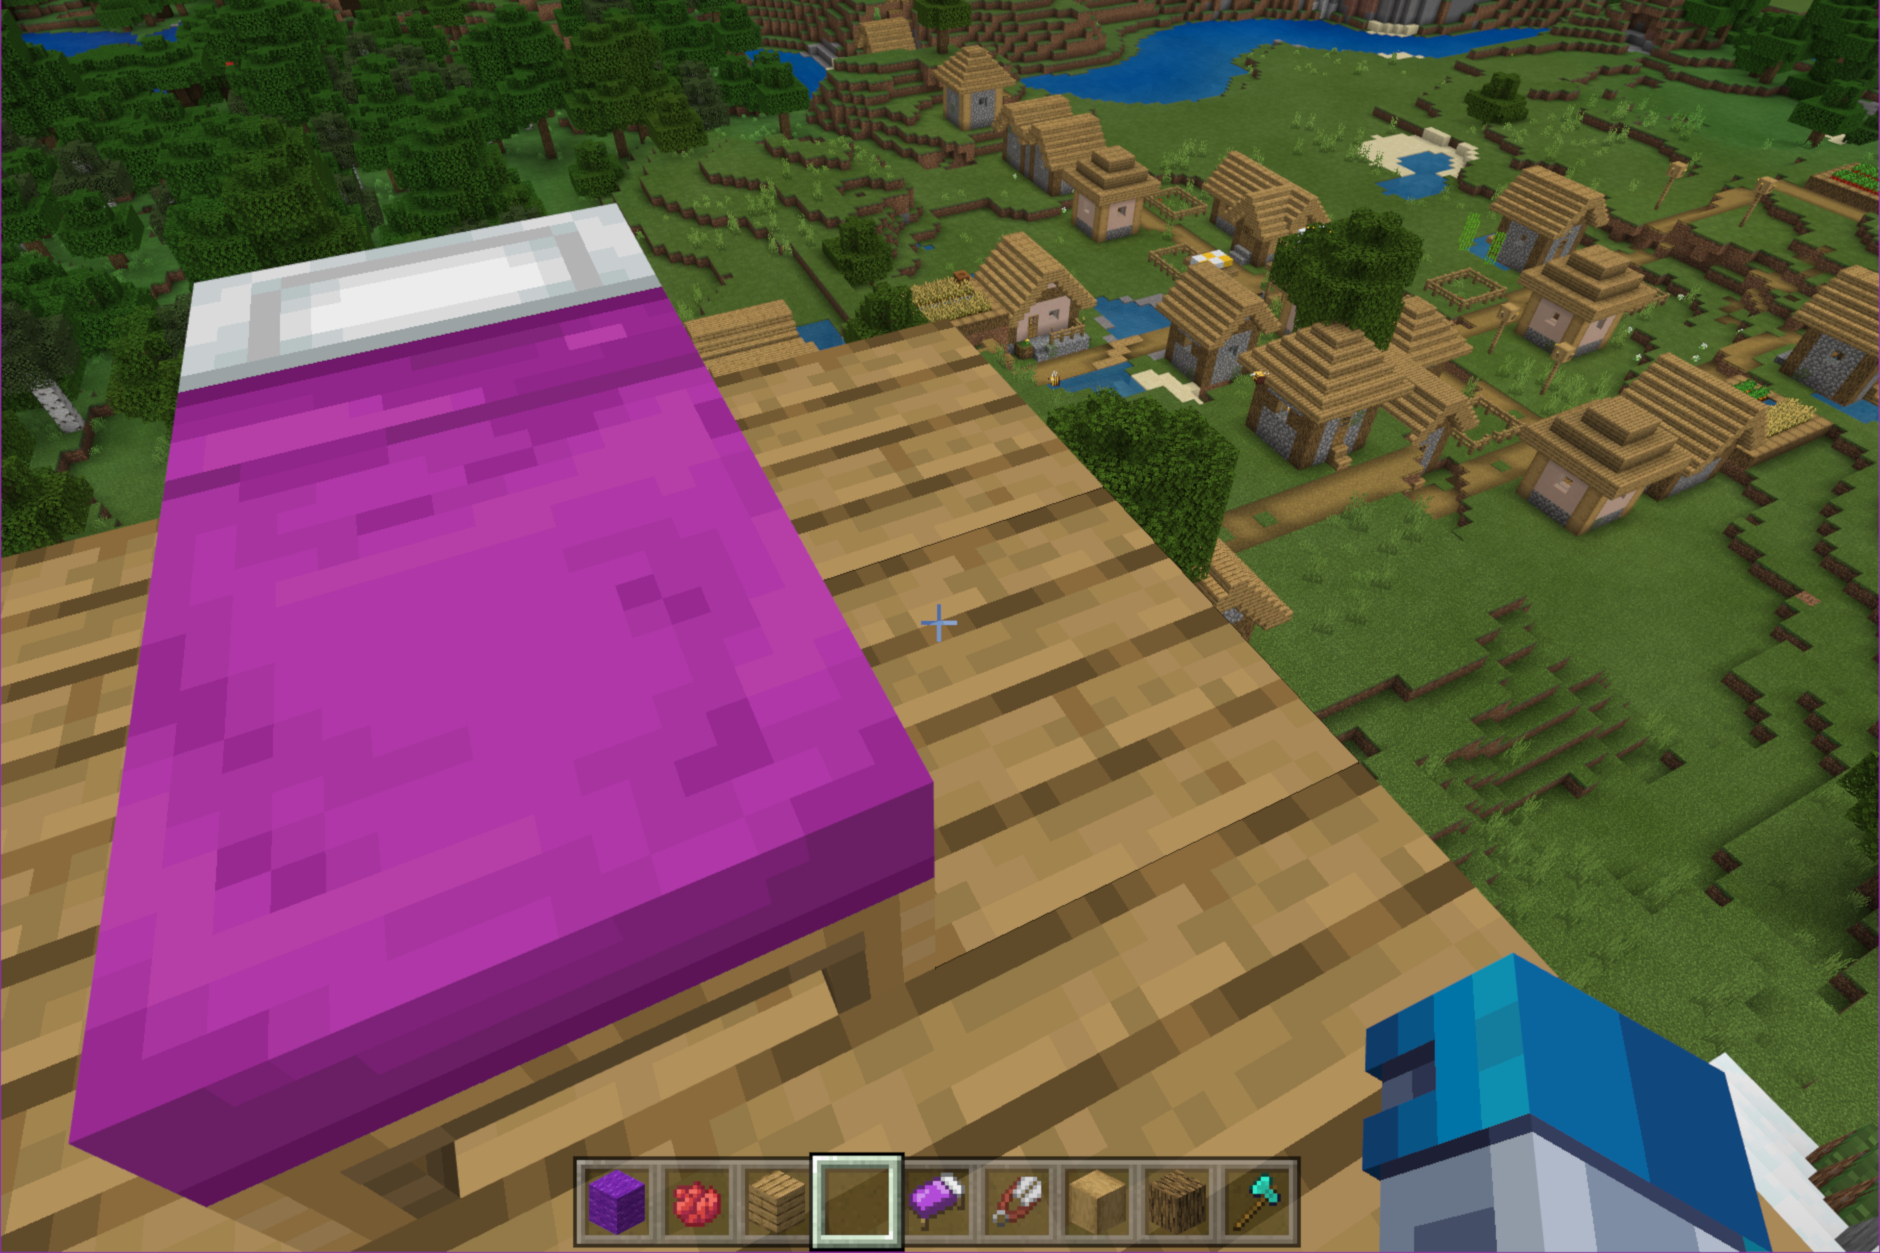 How to Craft a Bed in Minecraft: 5 Steps (with Pictures) - wikiHow